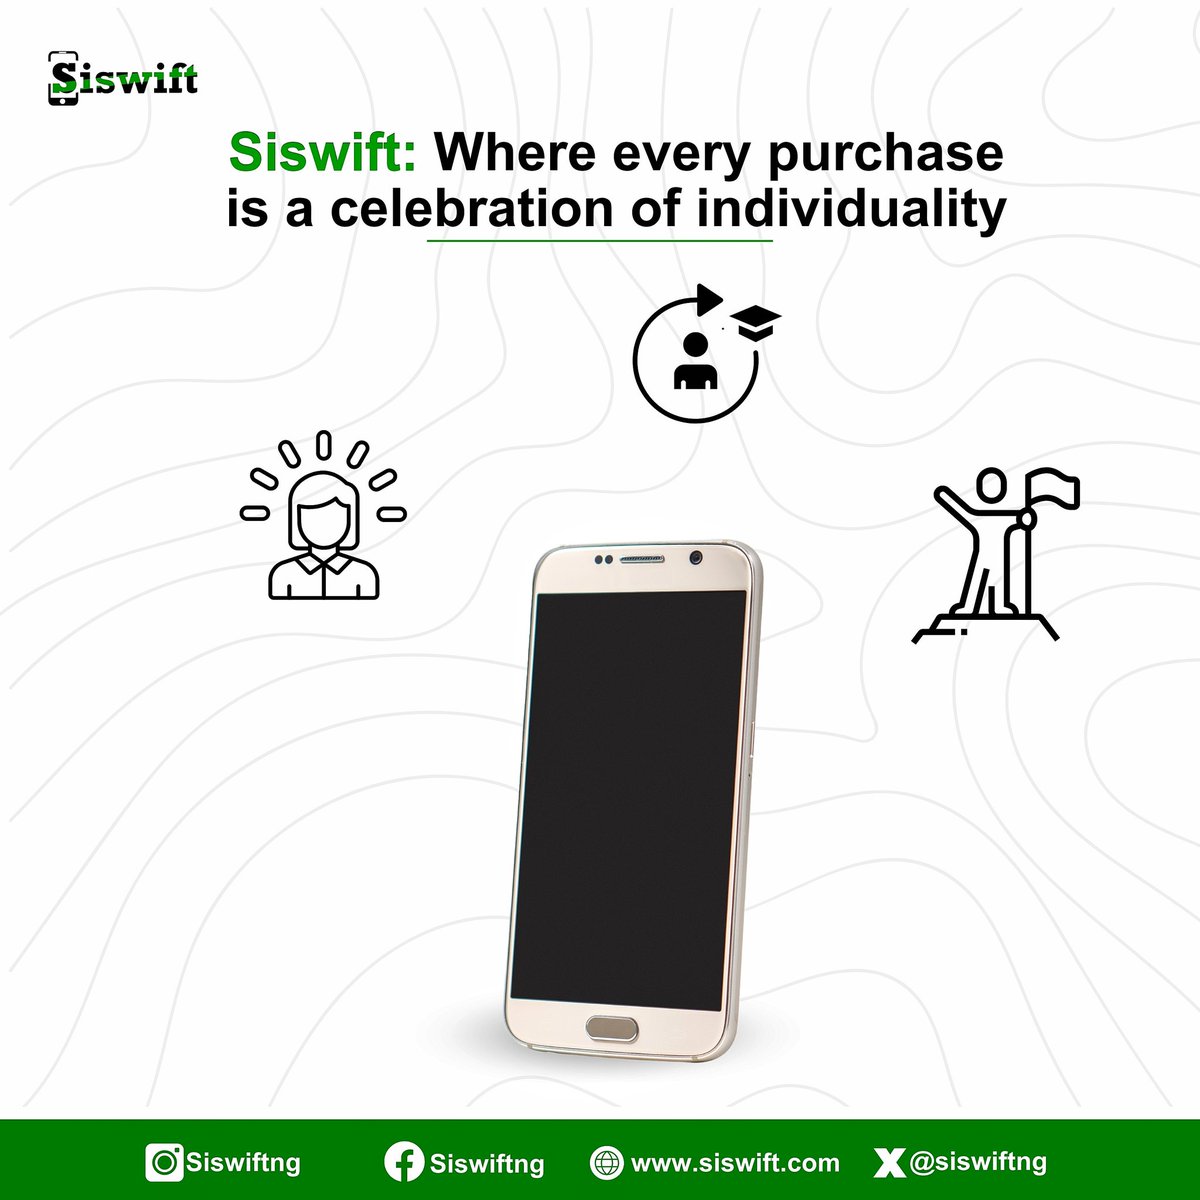 Celebrate your uniqueness with Siswift! 

Choose a device that speaks to your individuality.
.
.
.
#ExpressYourself #phonefreedom #transparenttransactions #negotiationpower #changingthegame #convenience #convenienceoverfixedprices #digitalmarketing #siswift #phones